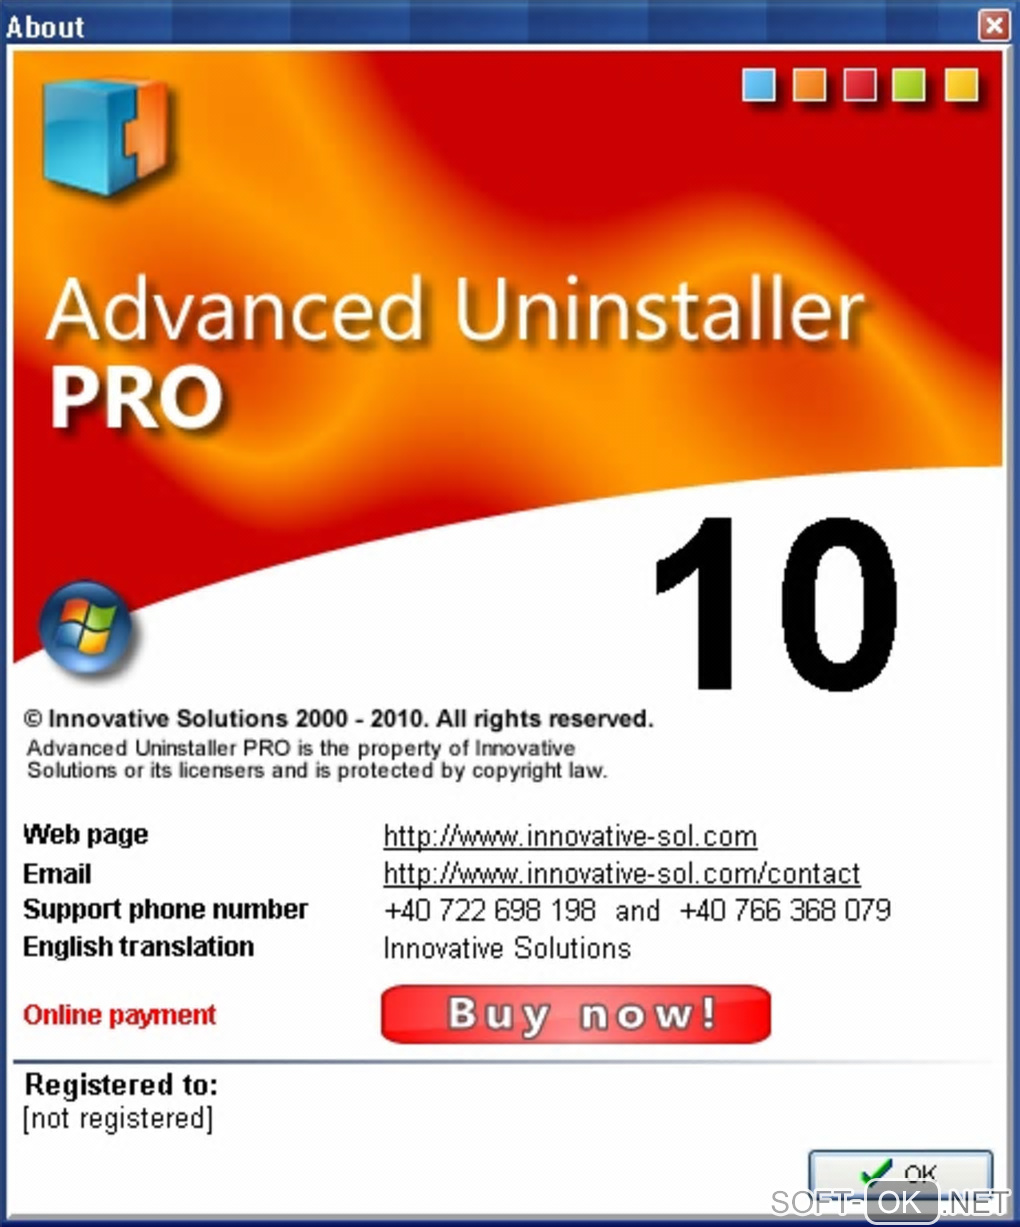 The appearance "Advanced Uninstaller Pro"